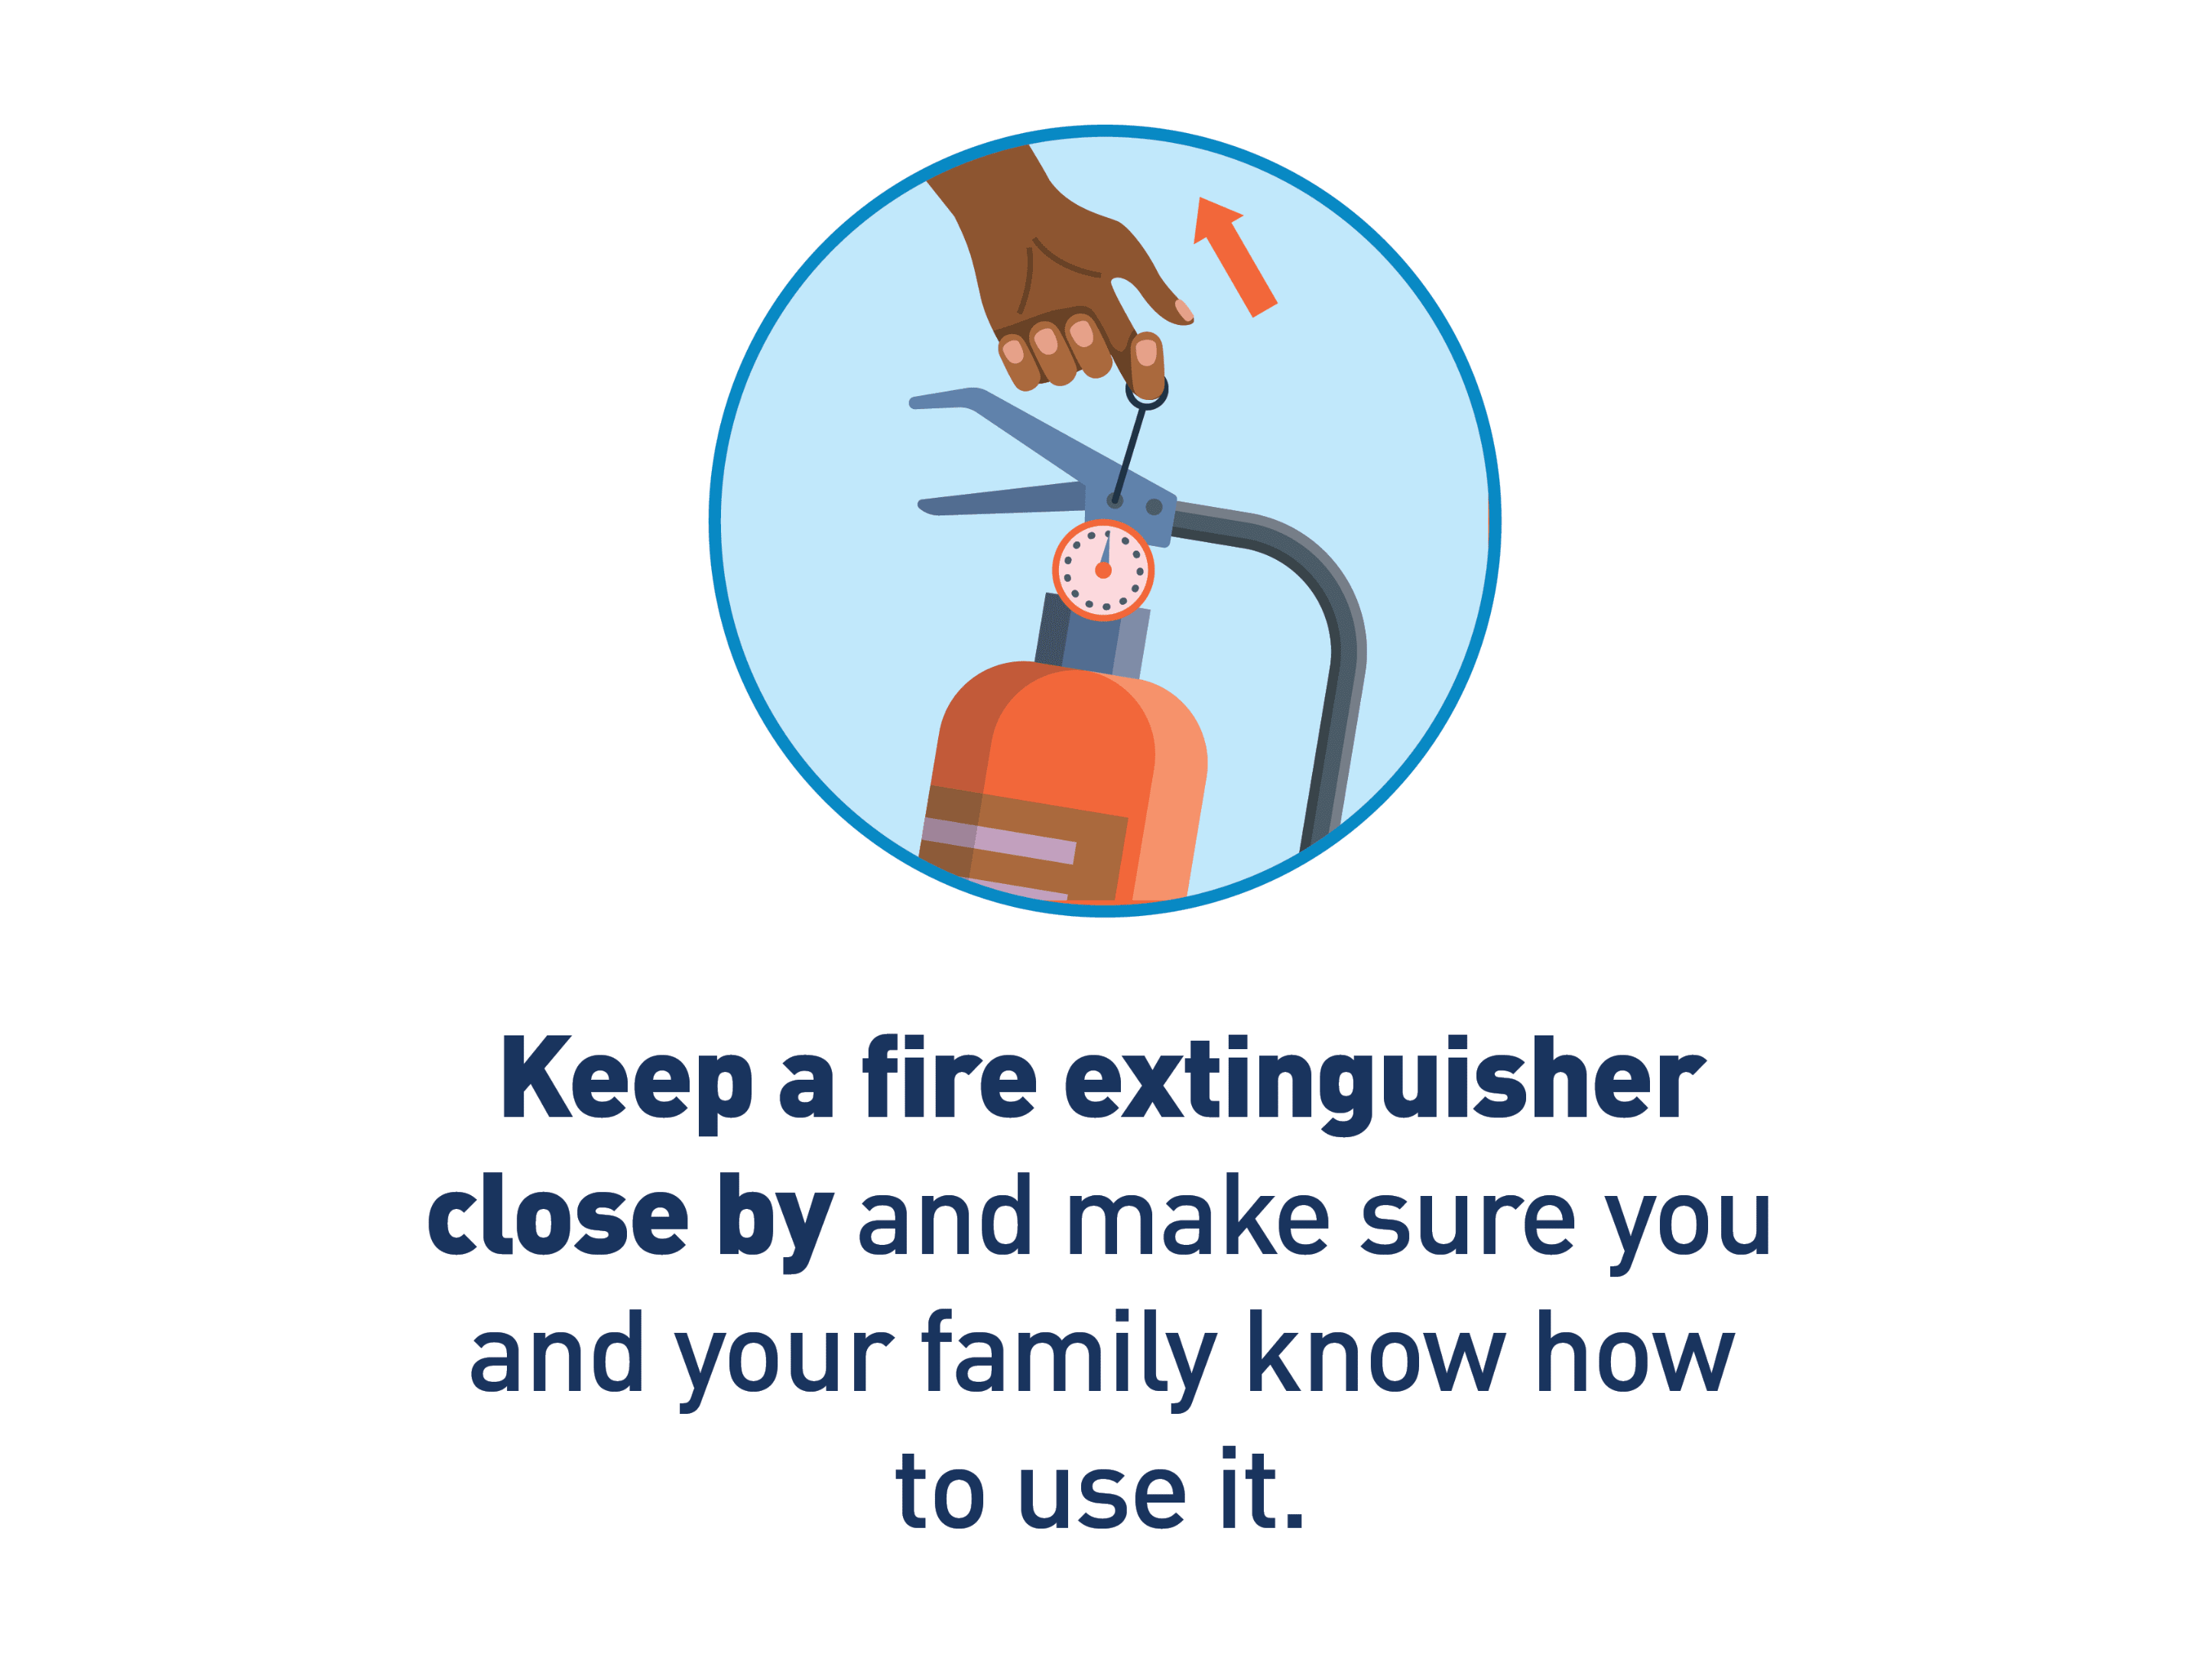 Image Description: Graphic of fire extinguisher. Text: Keep a fire extinguisher close by and make sure you and your family know how to use it.